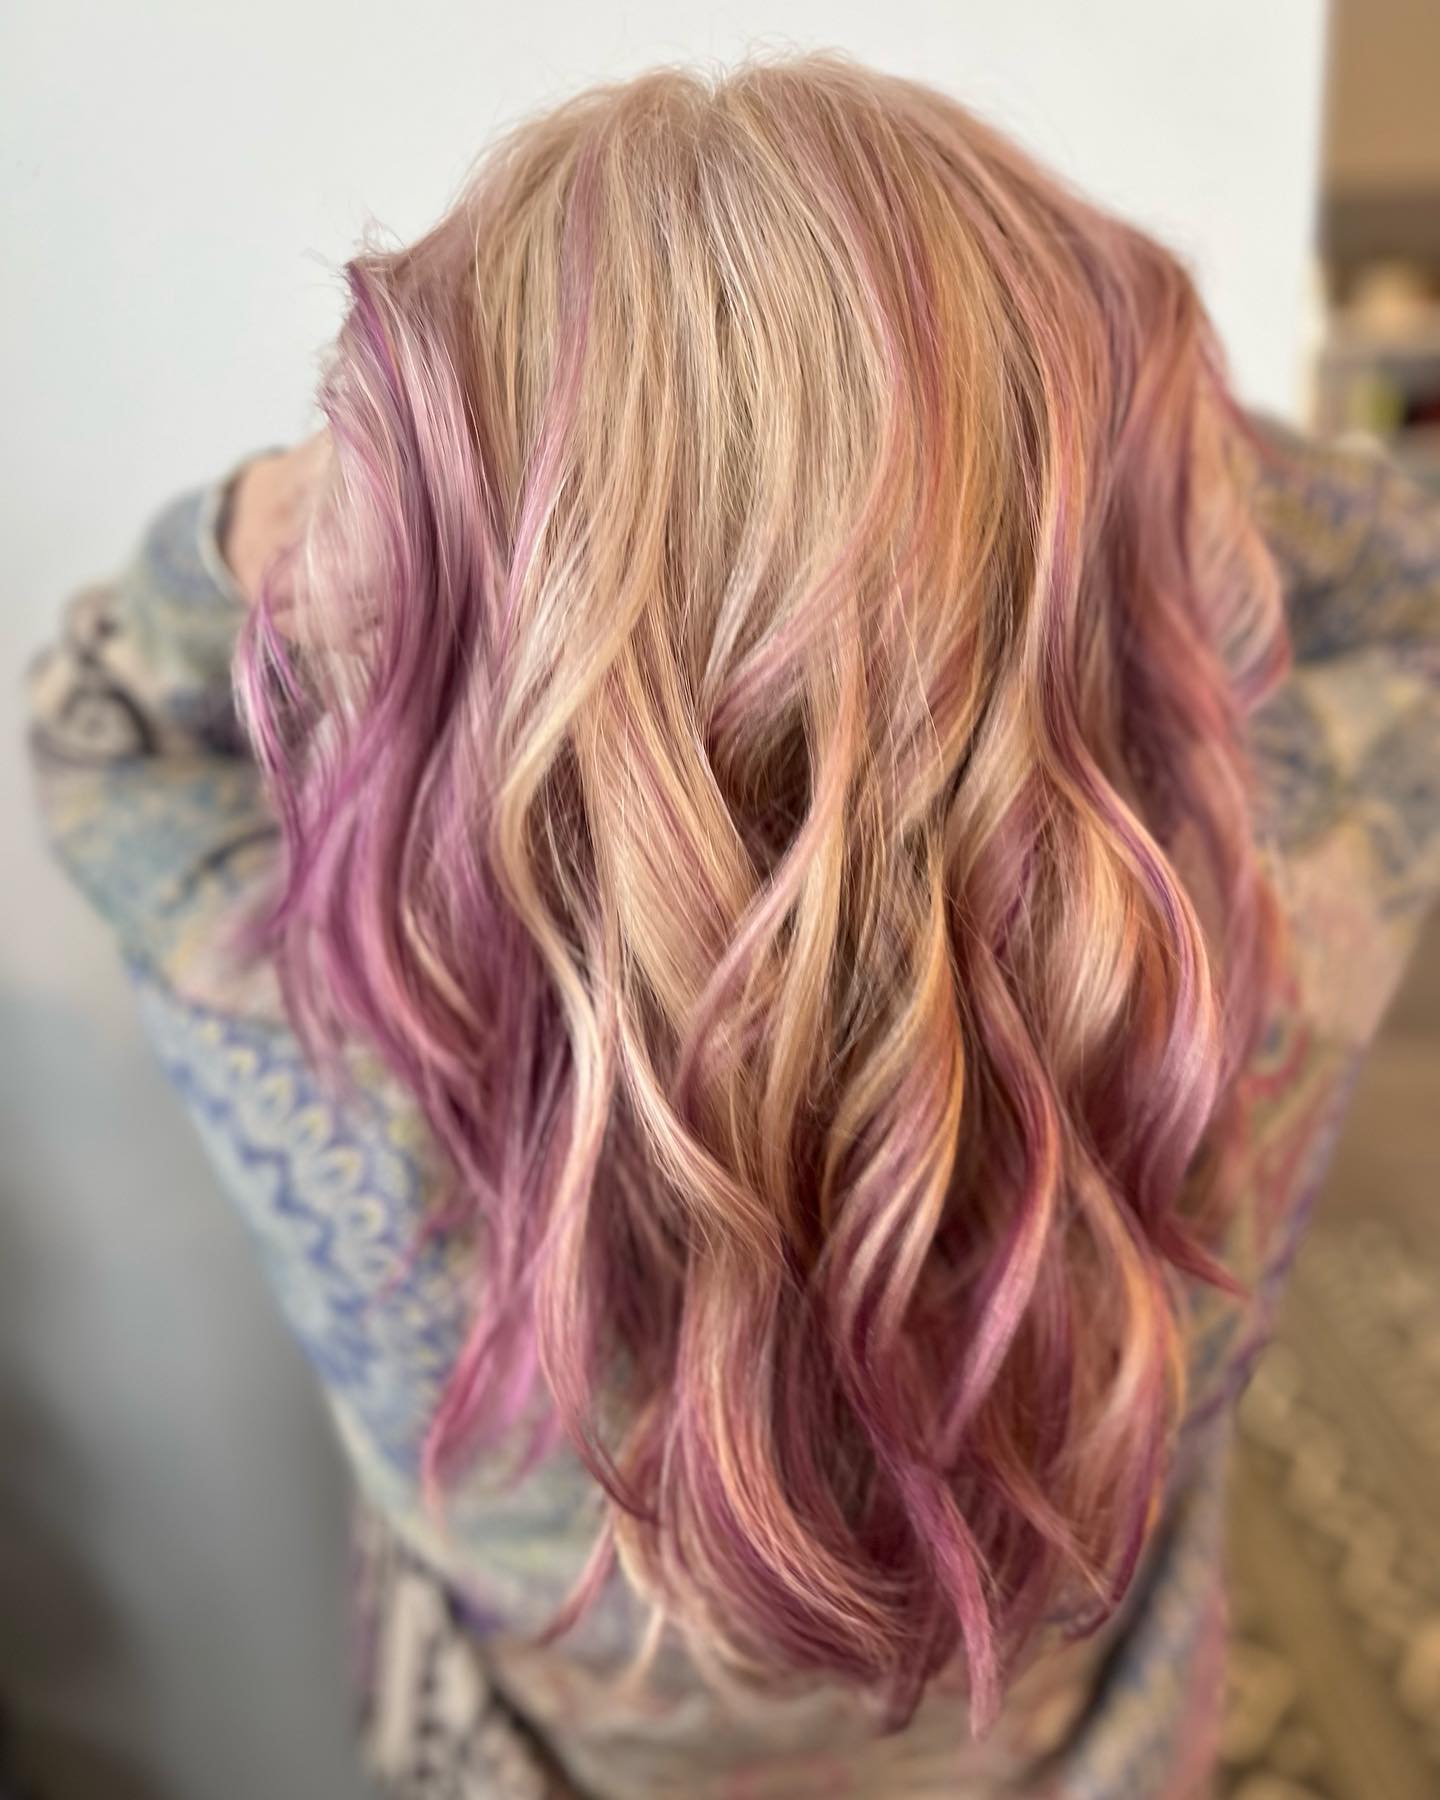 pink ombre hair color 108 Ombre pink hair blonde | Pastel pink ombre hair | Pink balayage Hair Pink Ombre Hair Color for Women